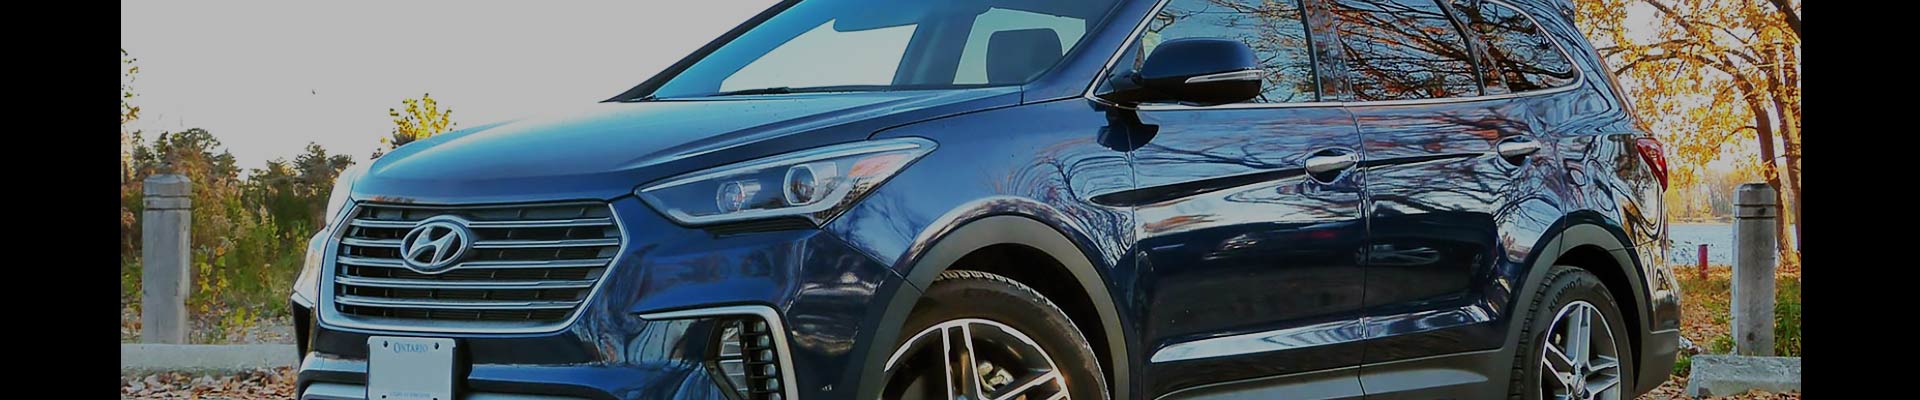 Shop Replacement and OEM 2019 Hyundai Santa Fe XL Parts with Discounted Price on the Net